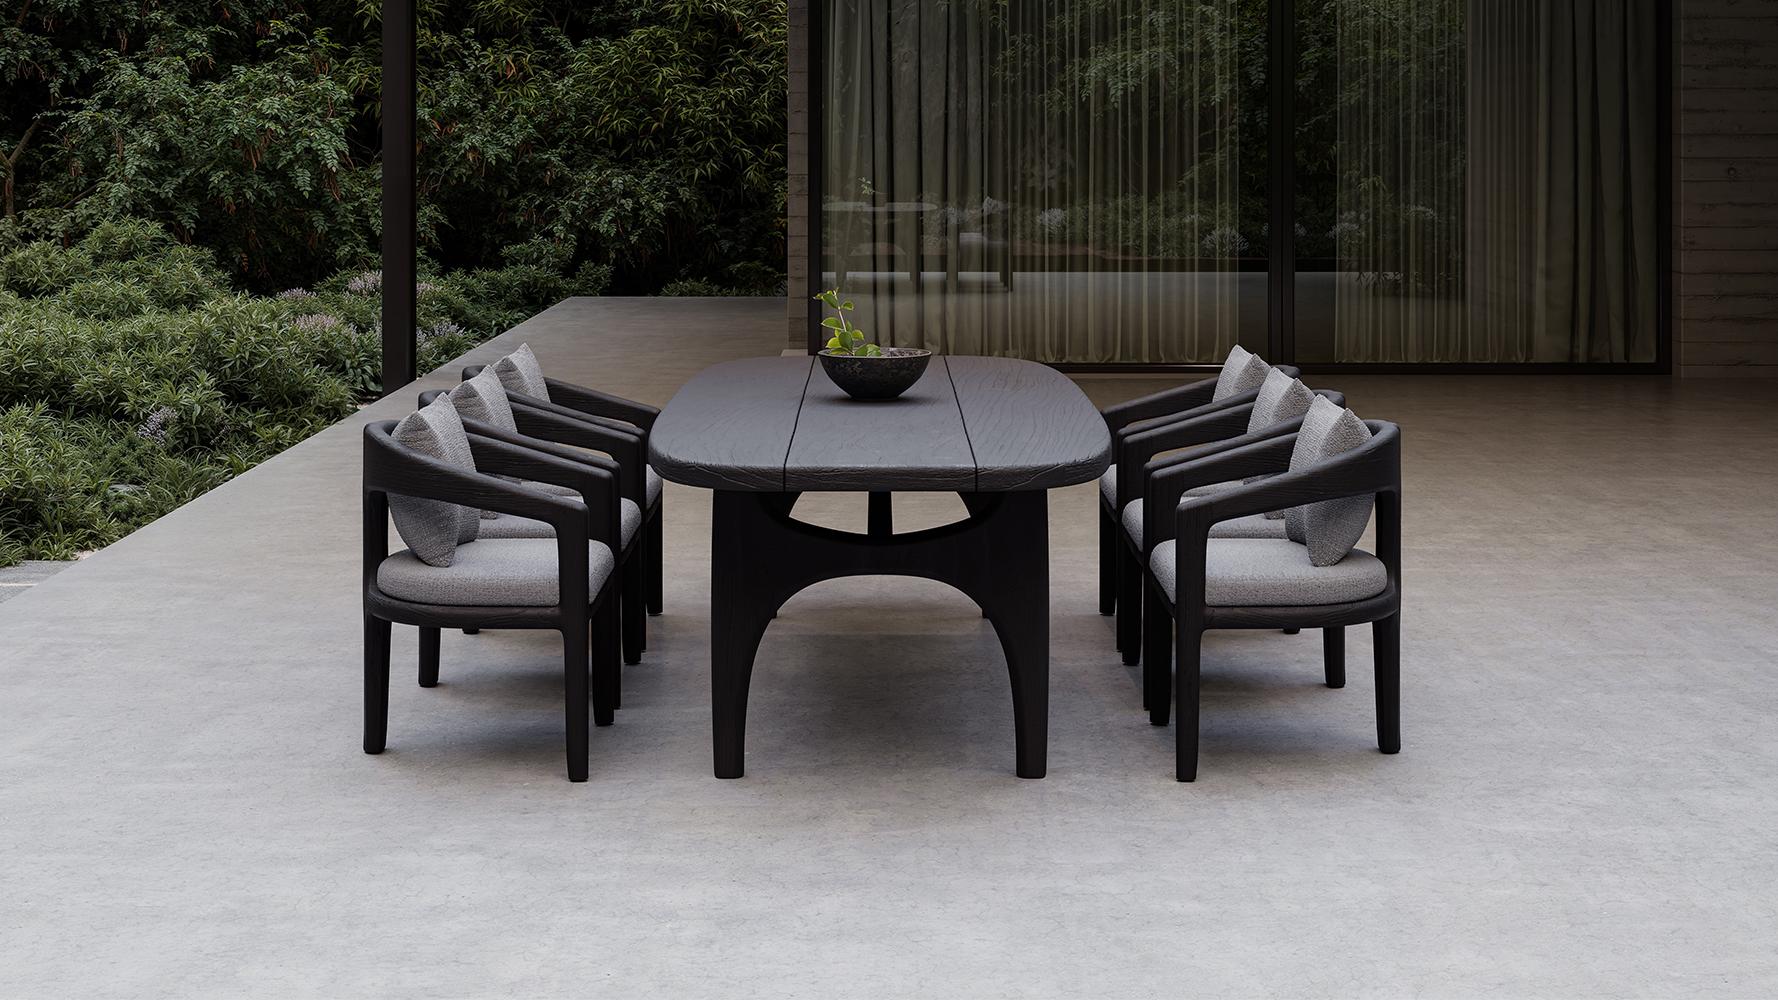 Whale-noche Outdoor Dining Table by SNOC In New Condition For Sale In Yukarıdudullu, 34